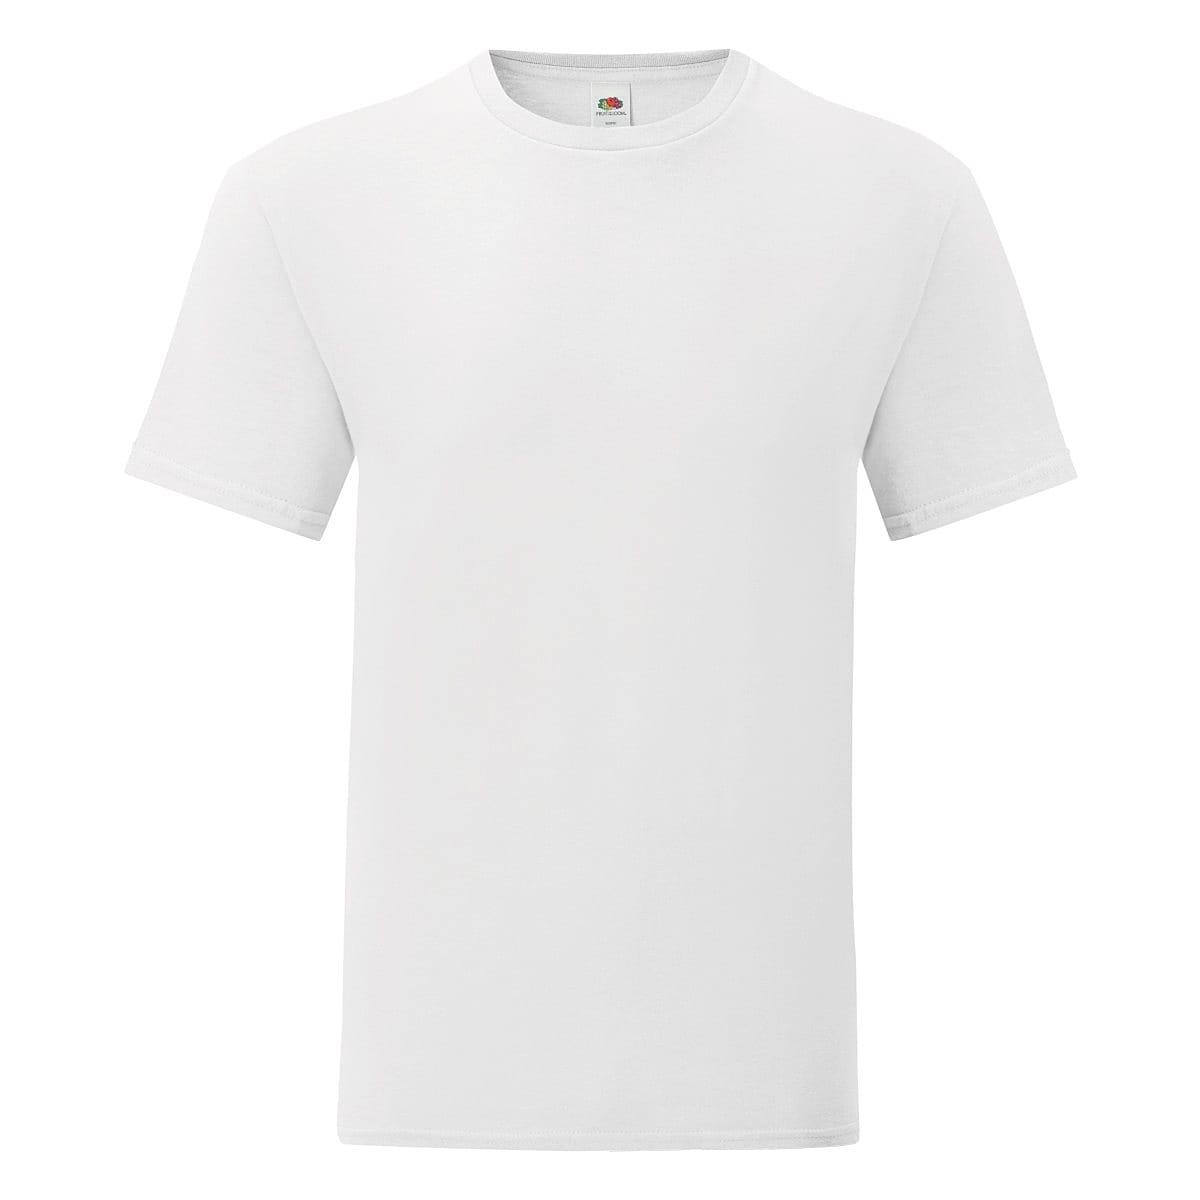 Fruit Of The Loom Mens Iconic T-Shirt in White (Product Code: 61430)